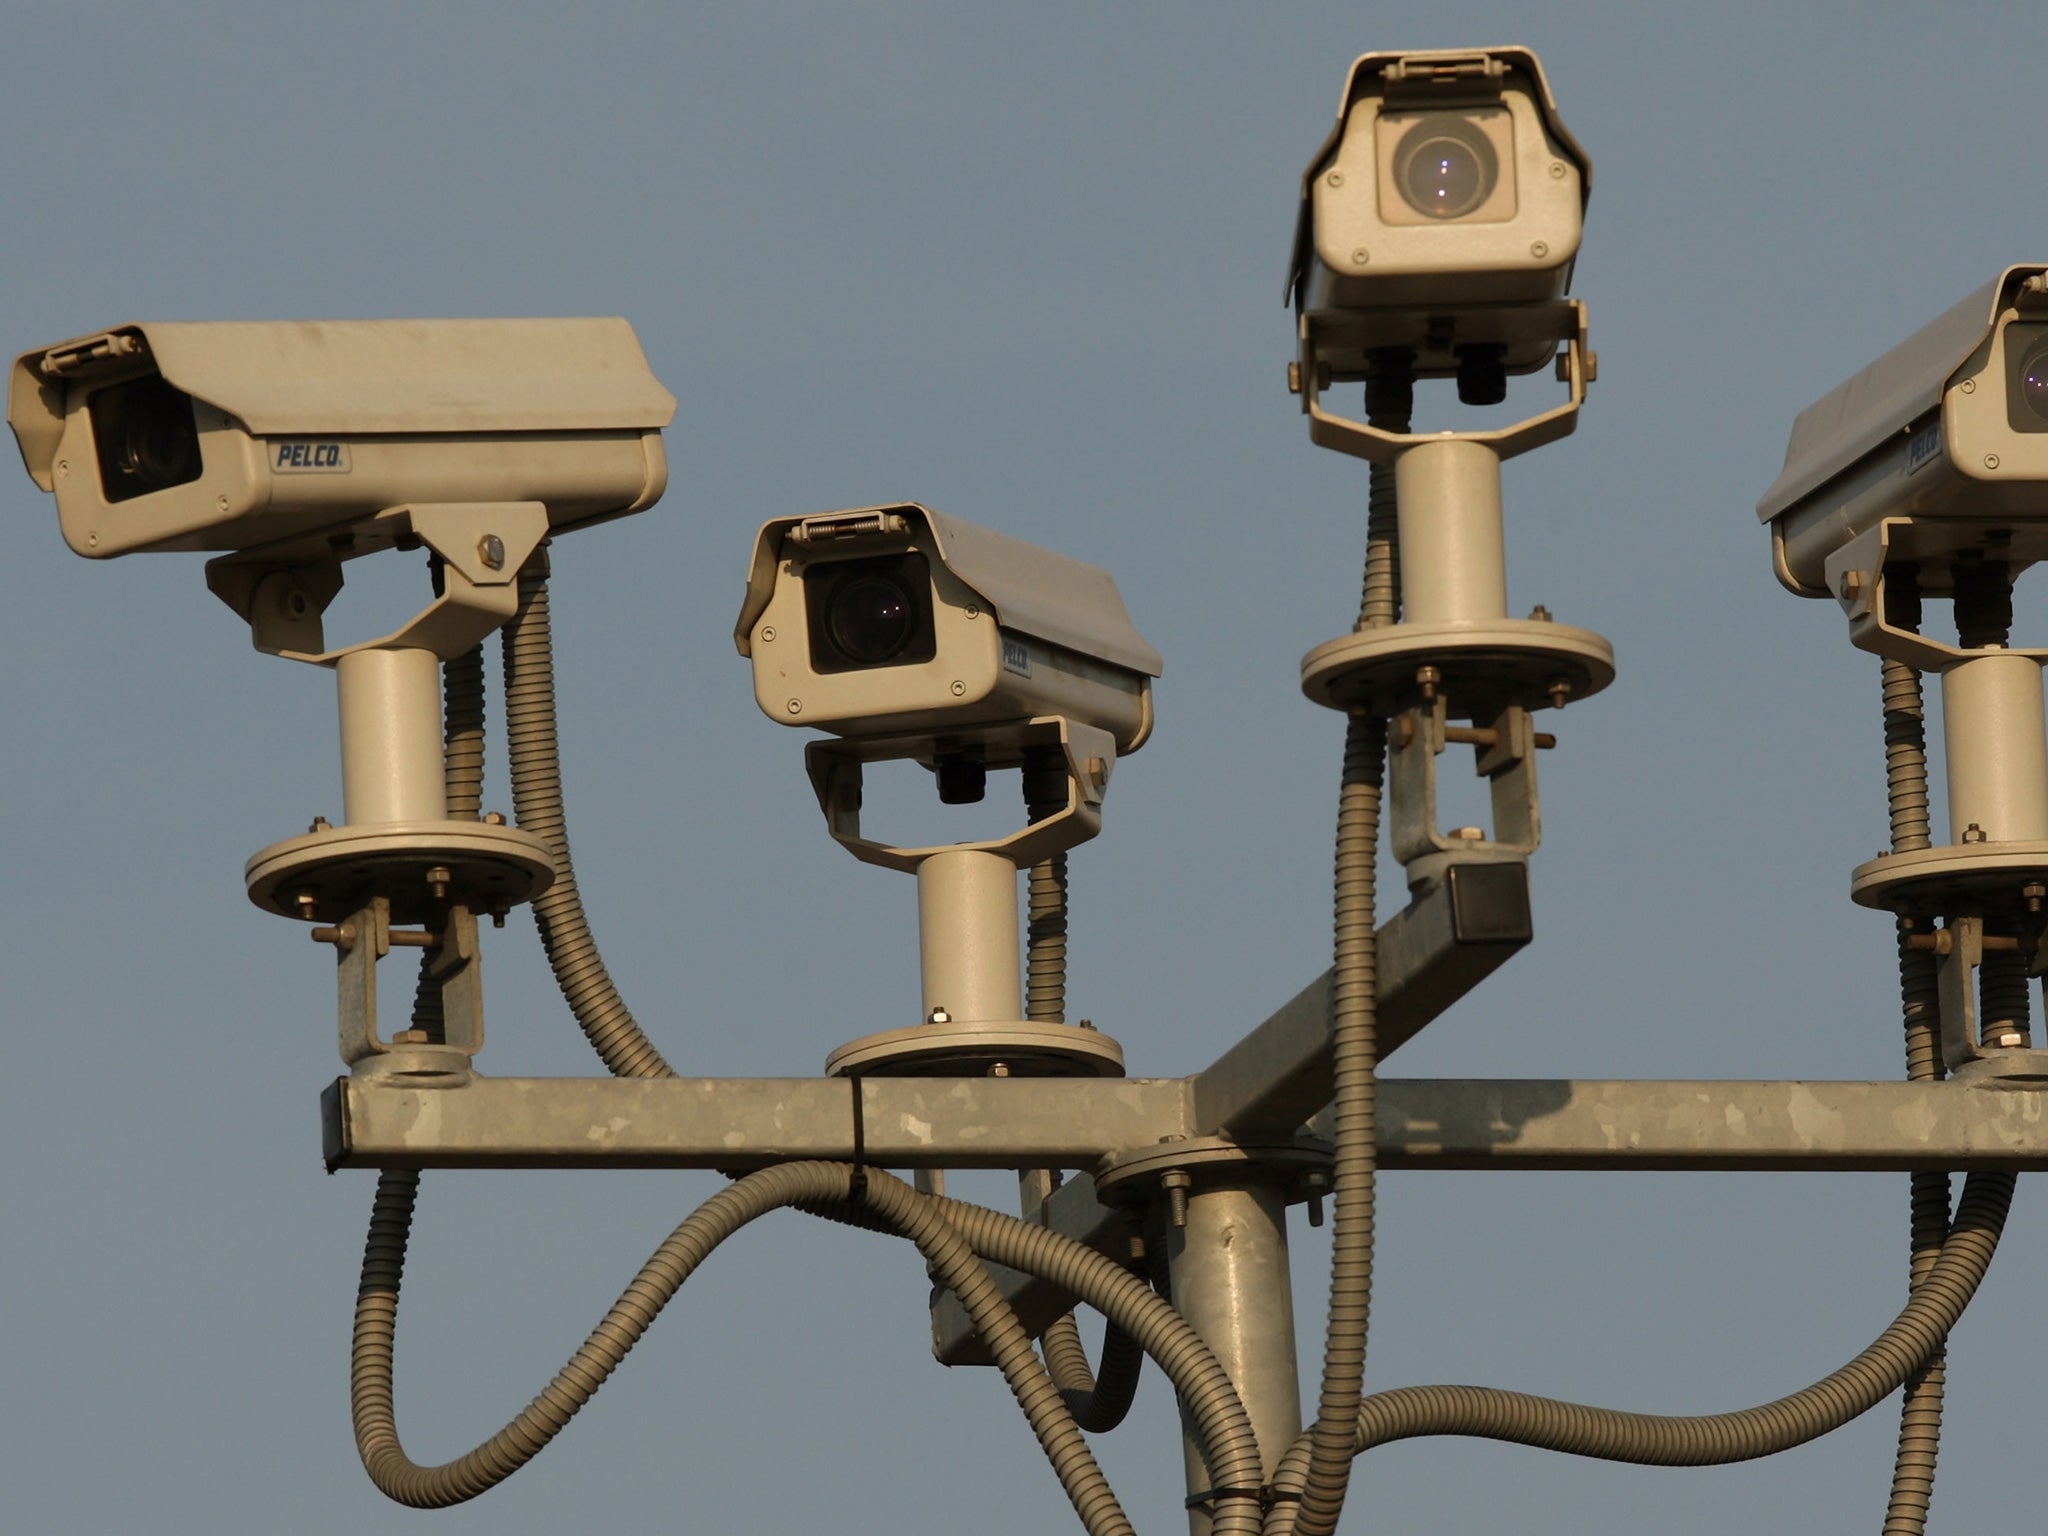 Greater surveillance could be a force for good, if used with moderation